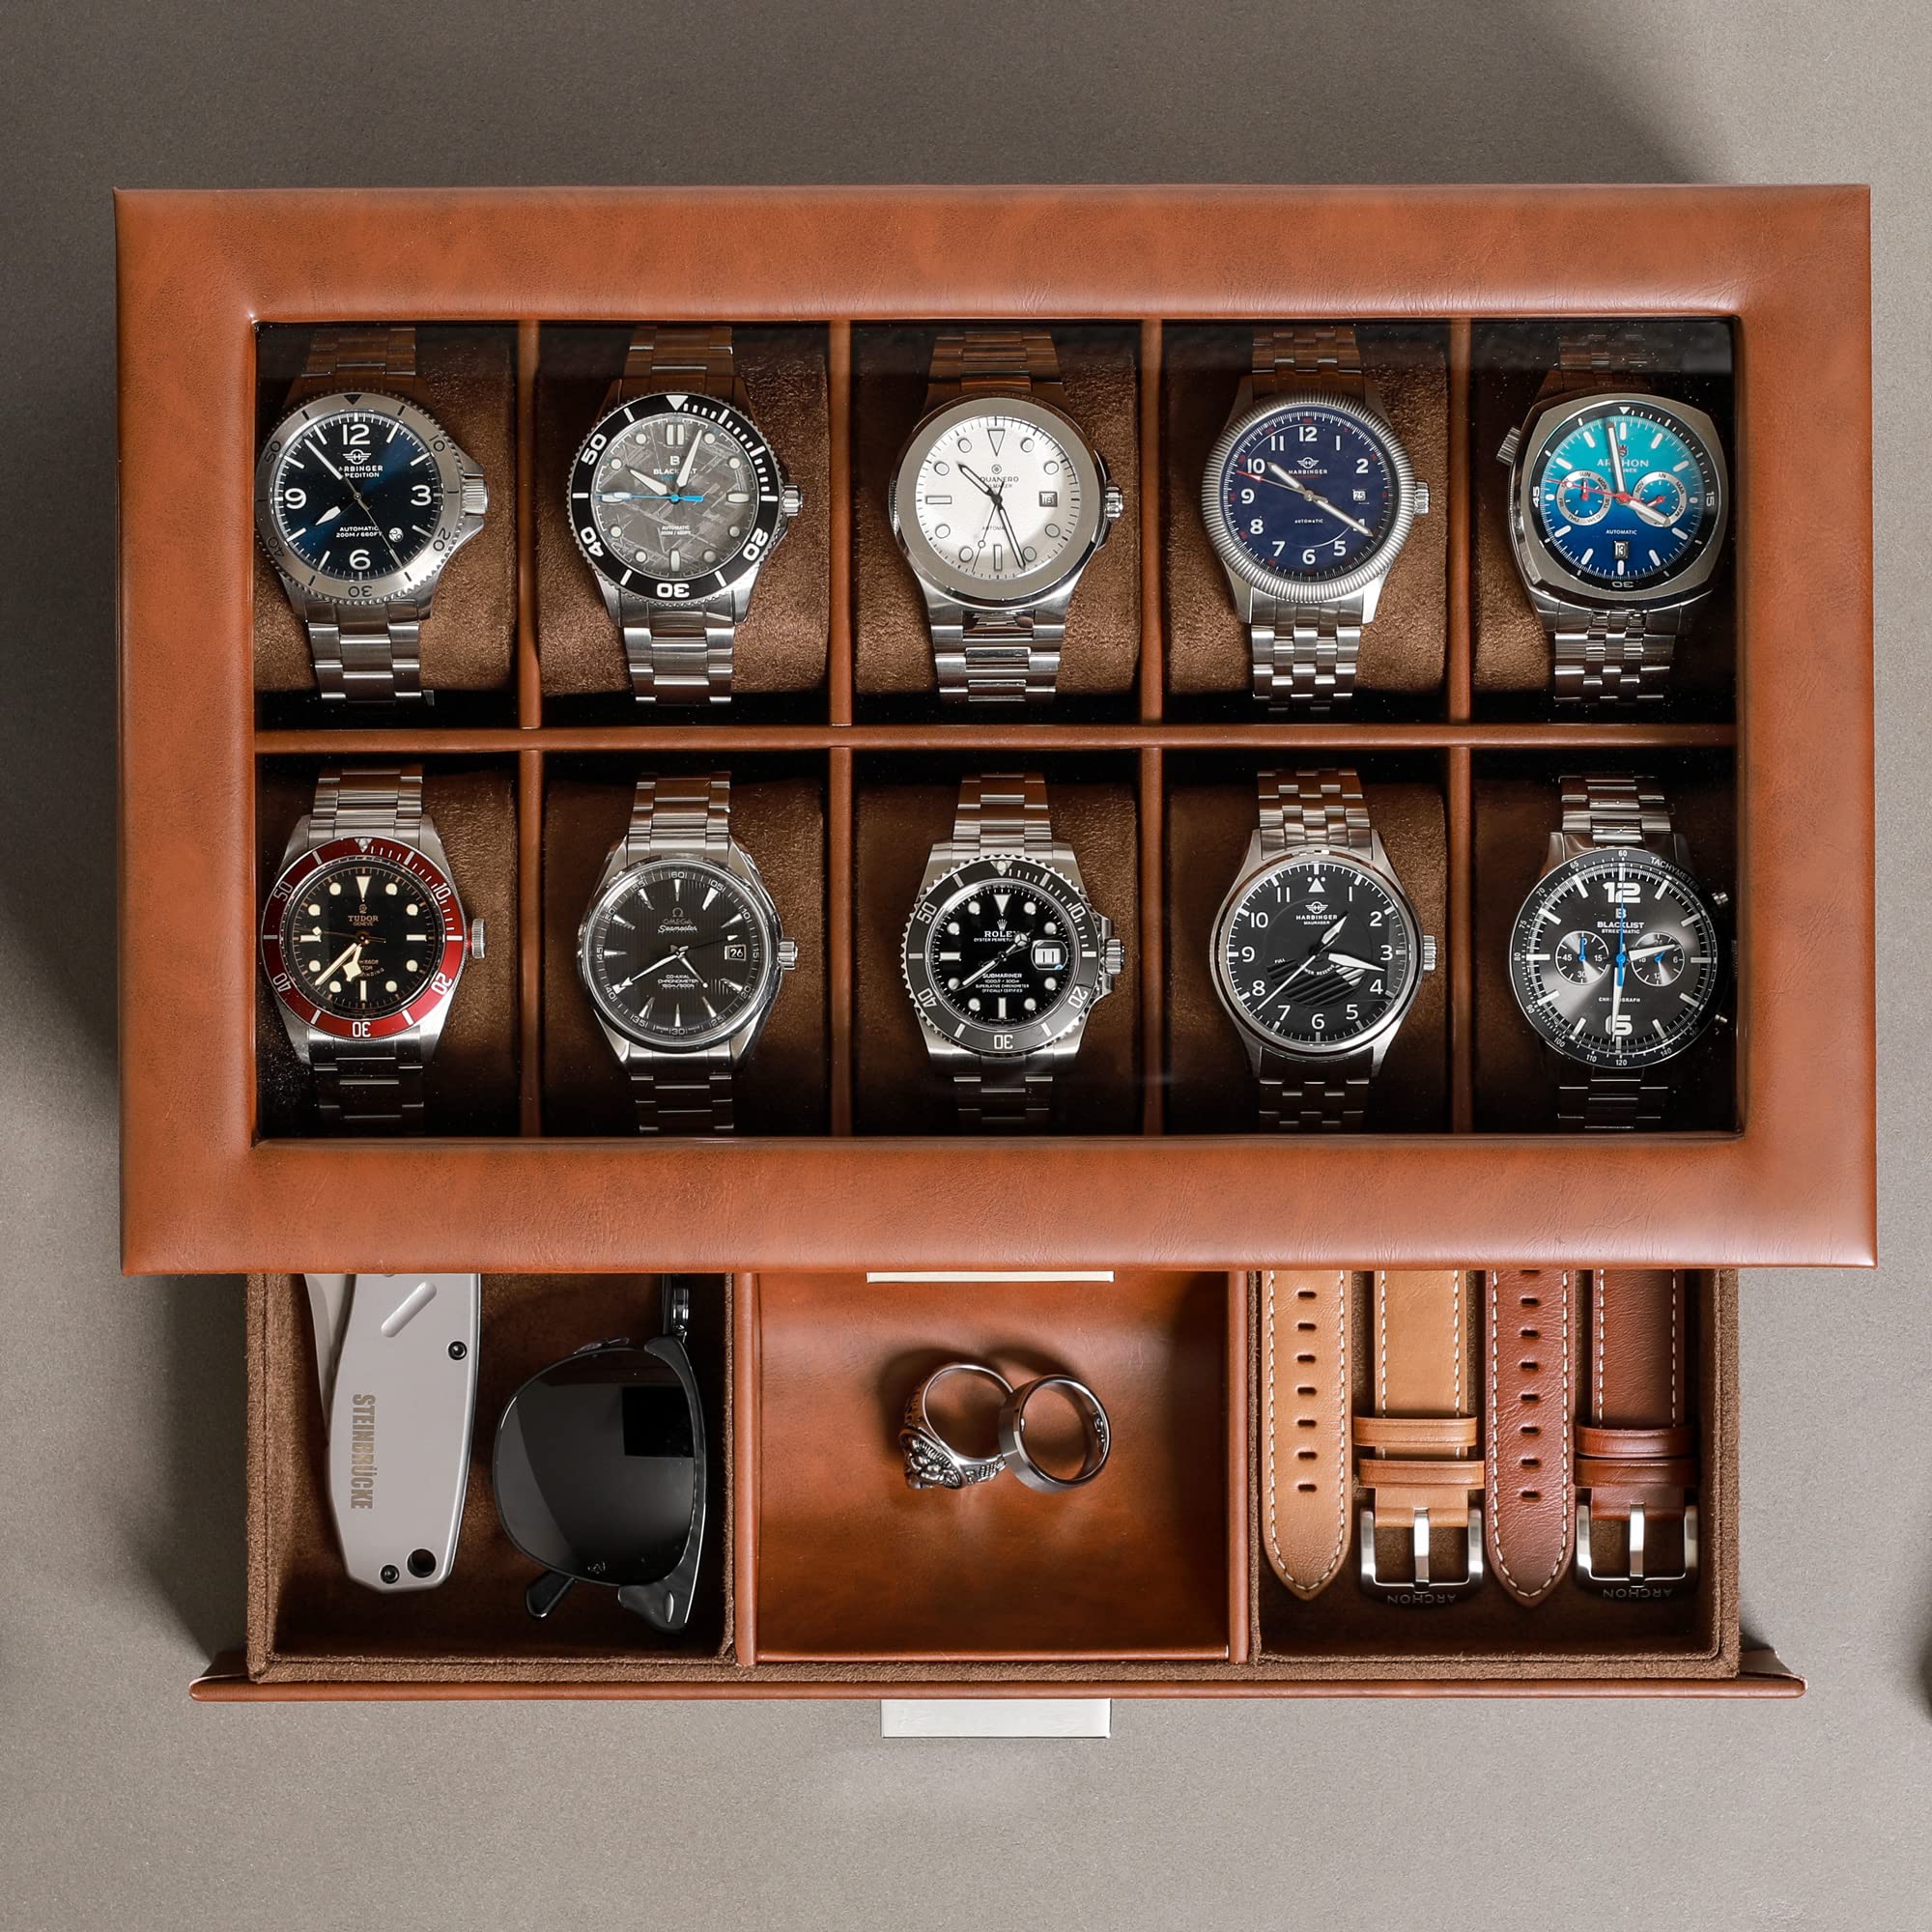 Gift Set 10 Slot Leather Watch Box with Valet Drawer & Matching 5 Watch Travel Case - Luxury Watch Case Display Organizer, Locking Mens Jewelry Watches Holder, Men's Storage Boxes Glass Top Tan/Brown